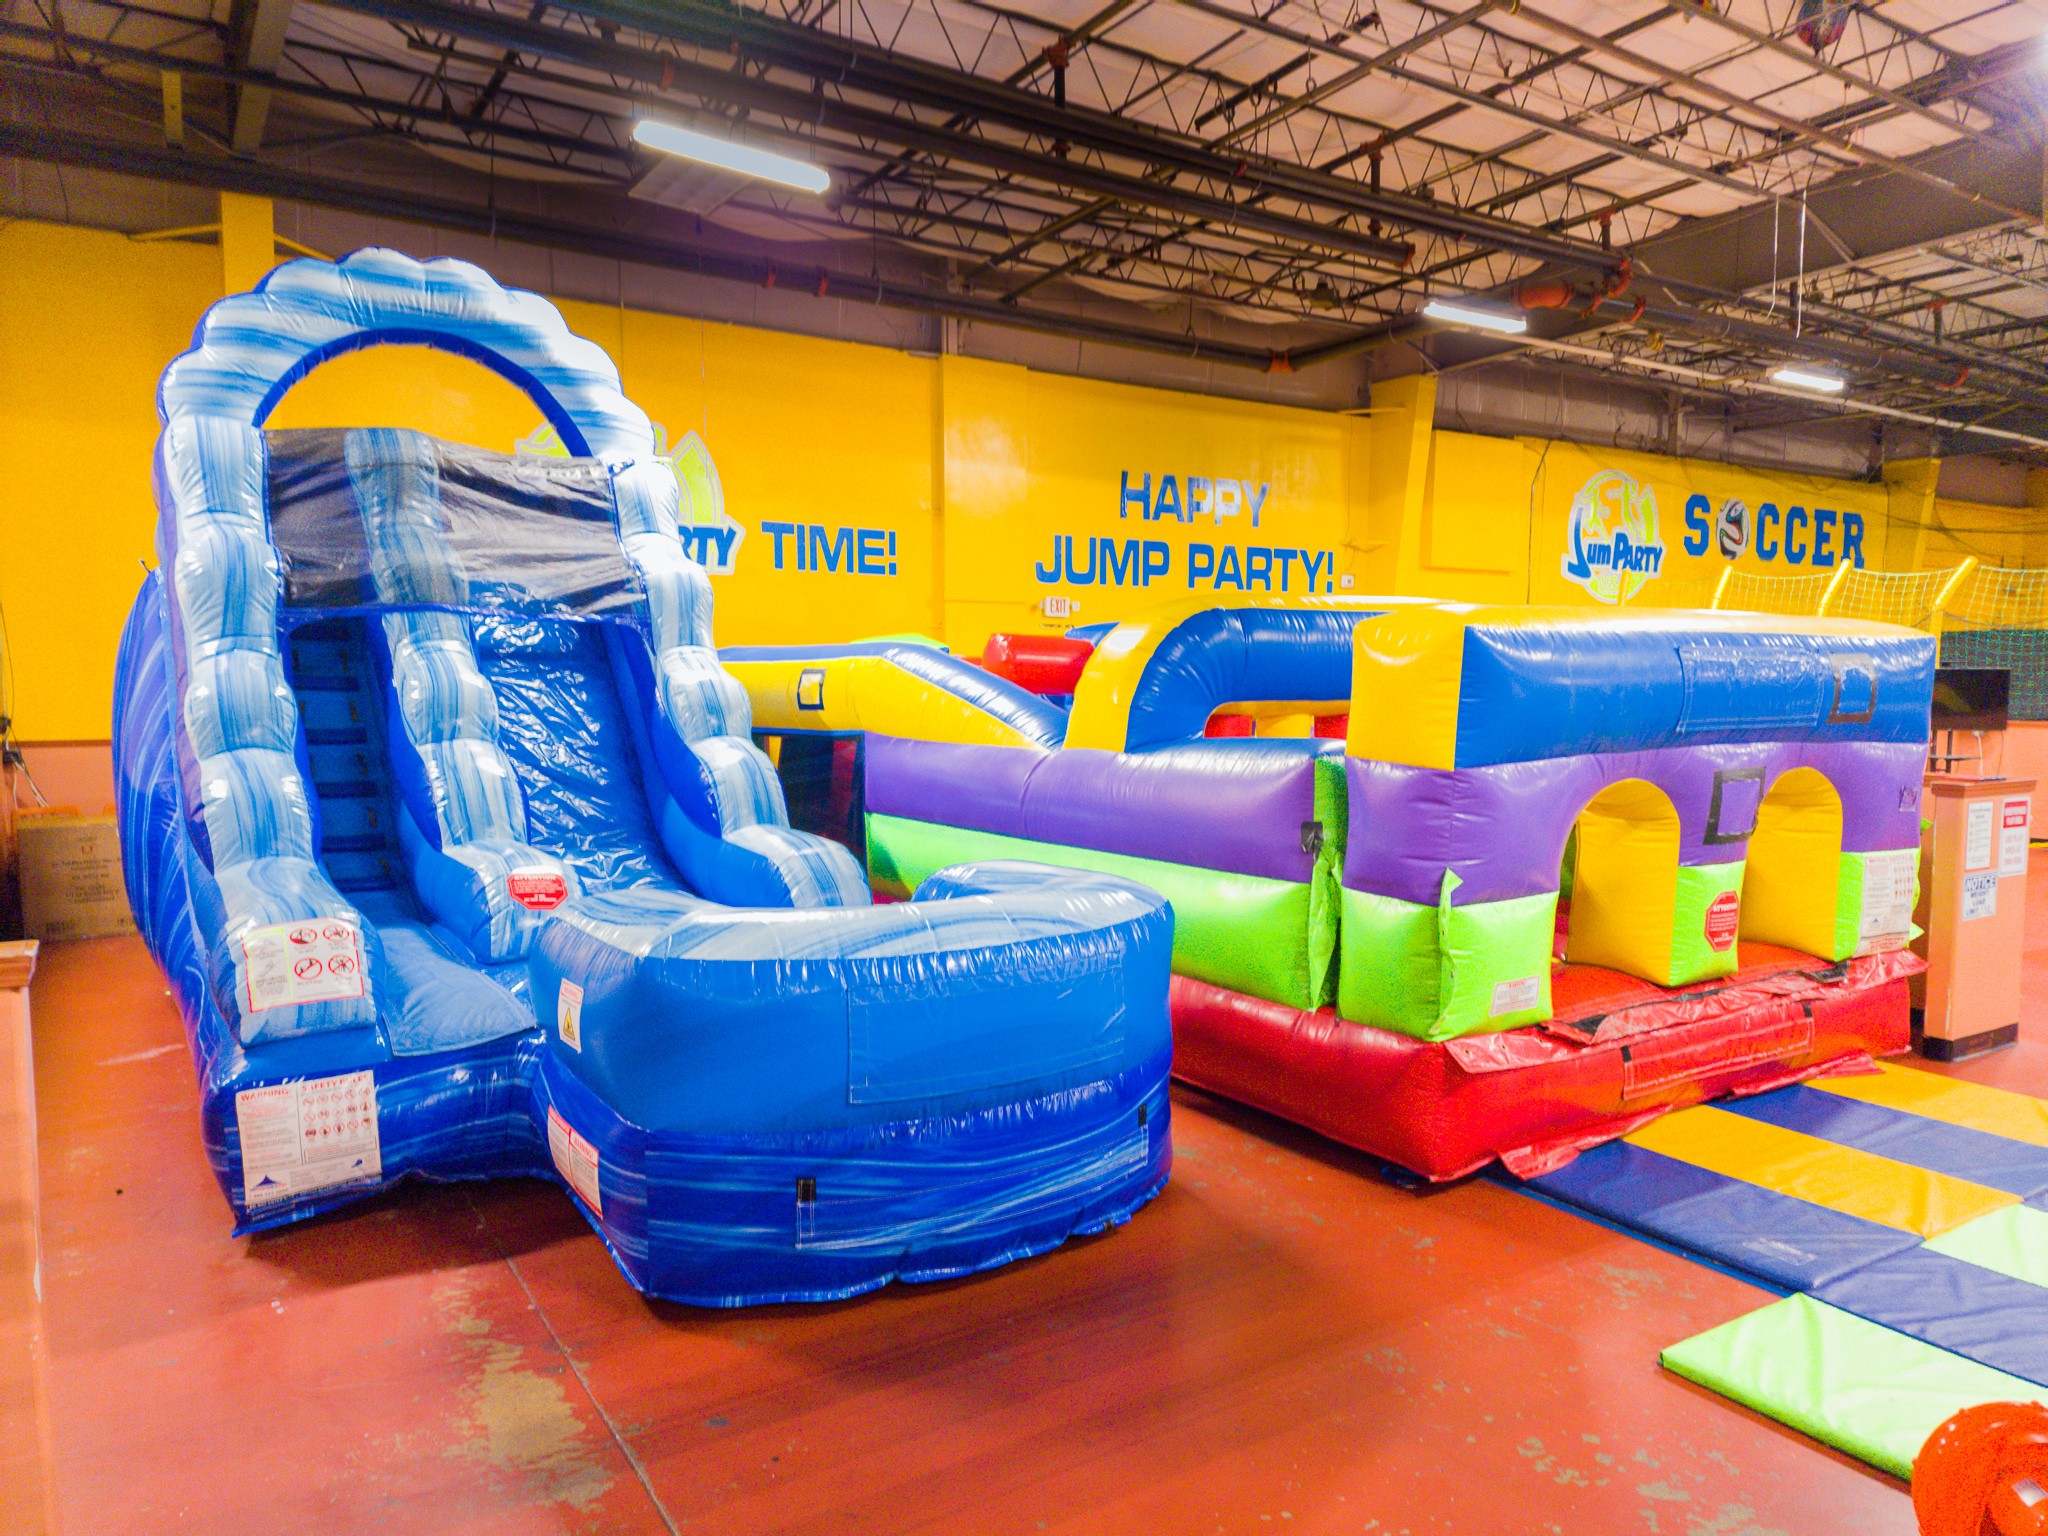 Jump Party USA has two bounce houses for toddlers and small kids. A blue bounce house with a slide and a bounce house obstacle course